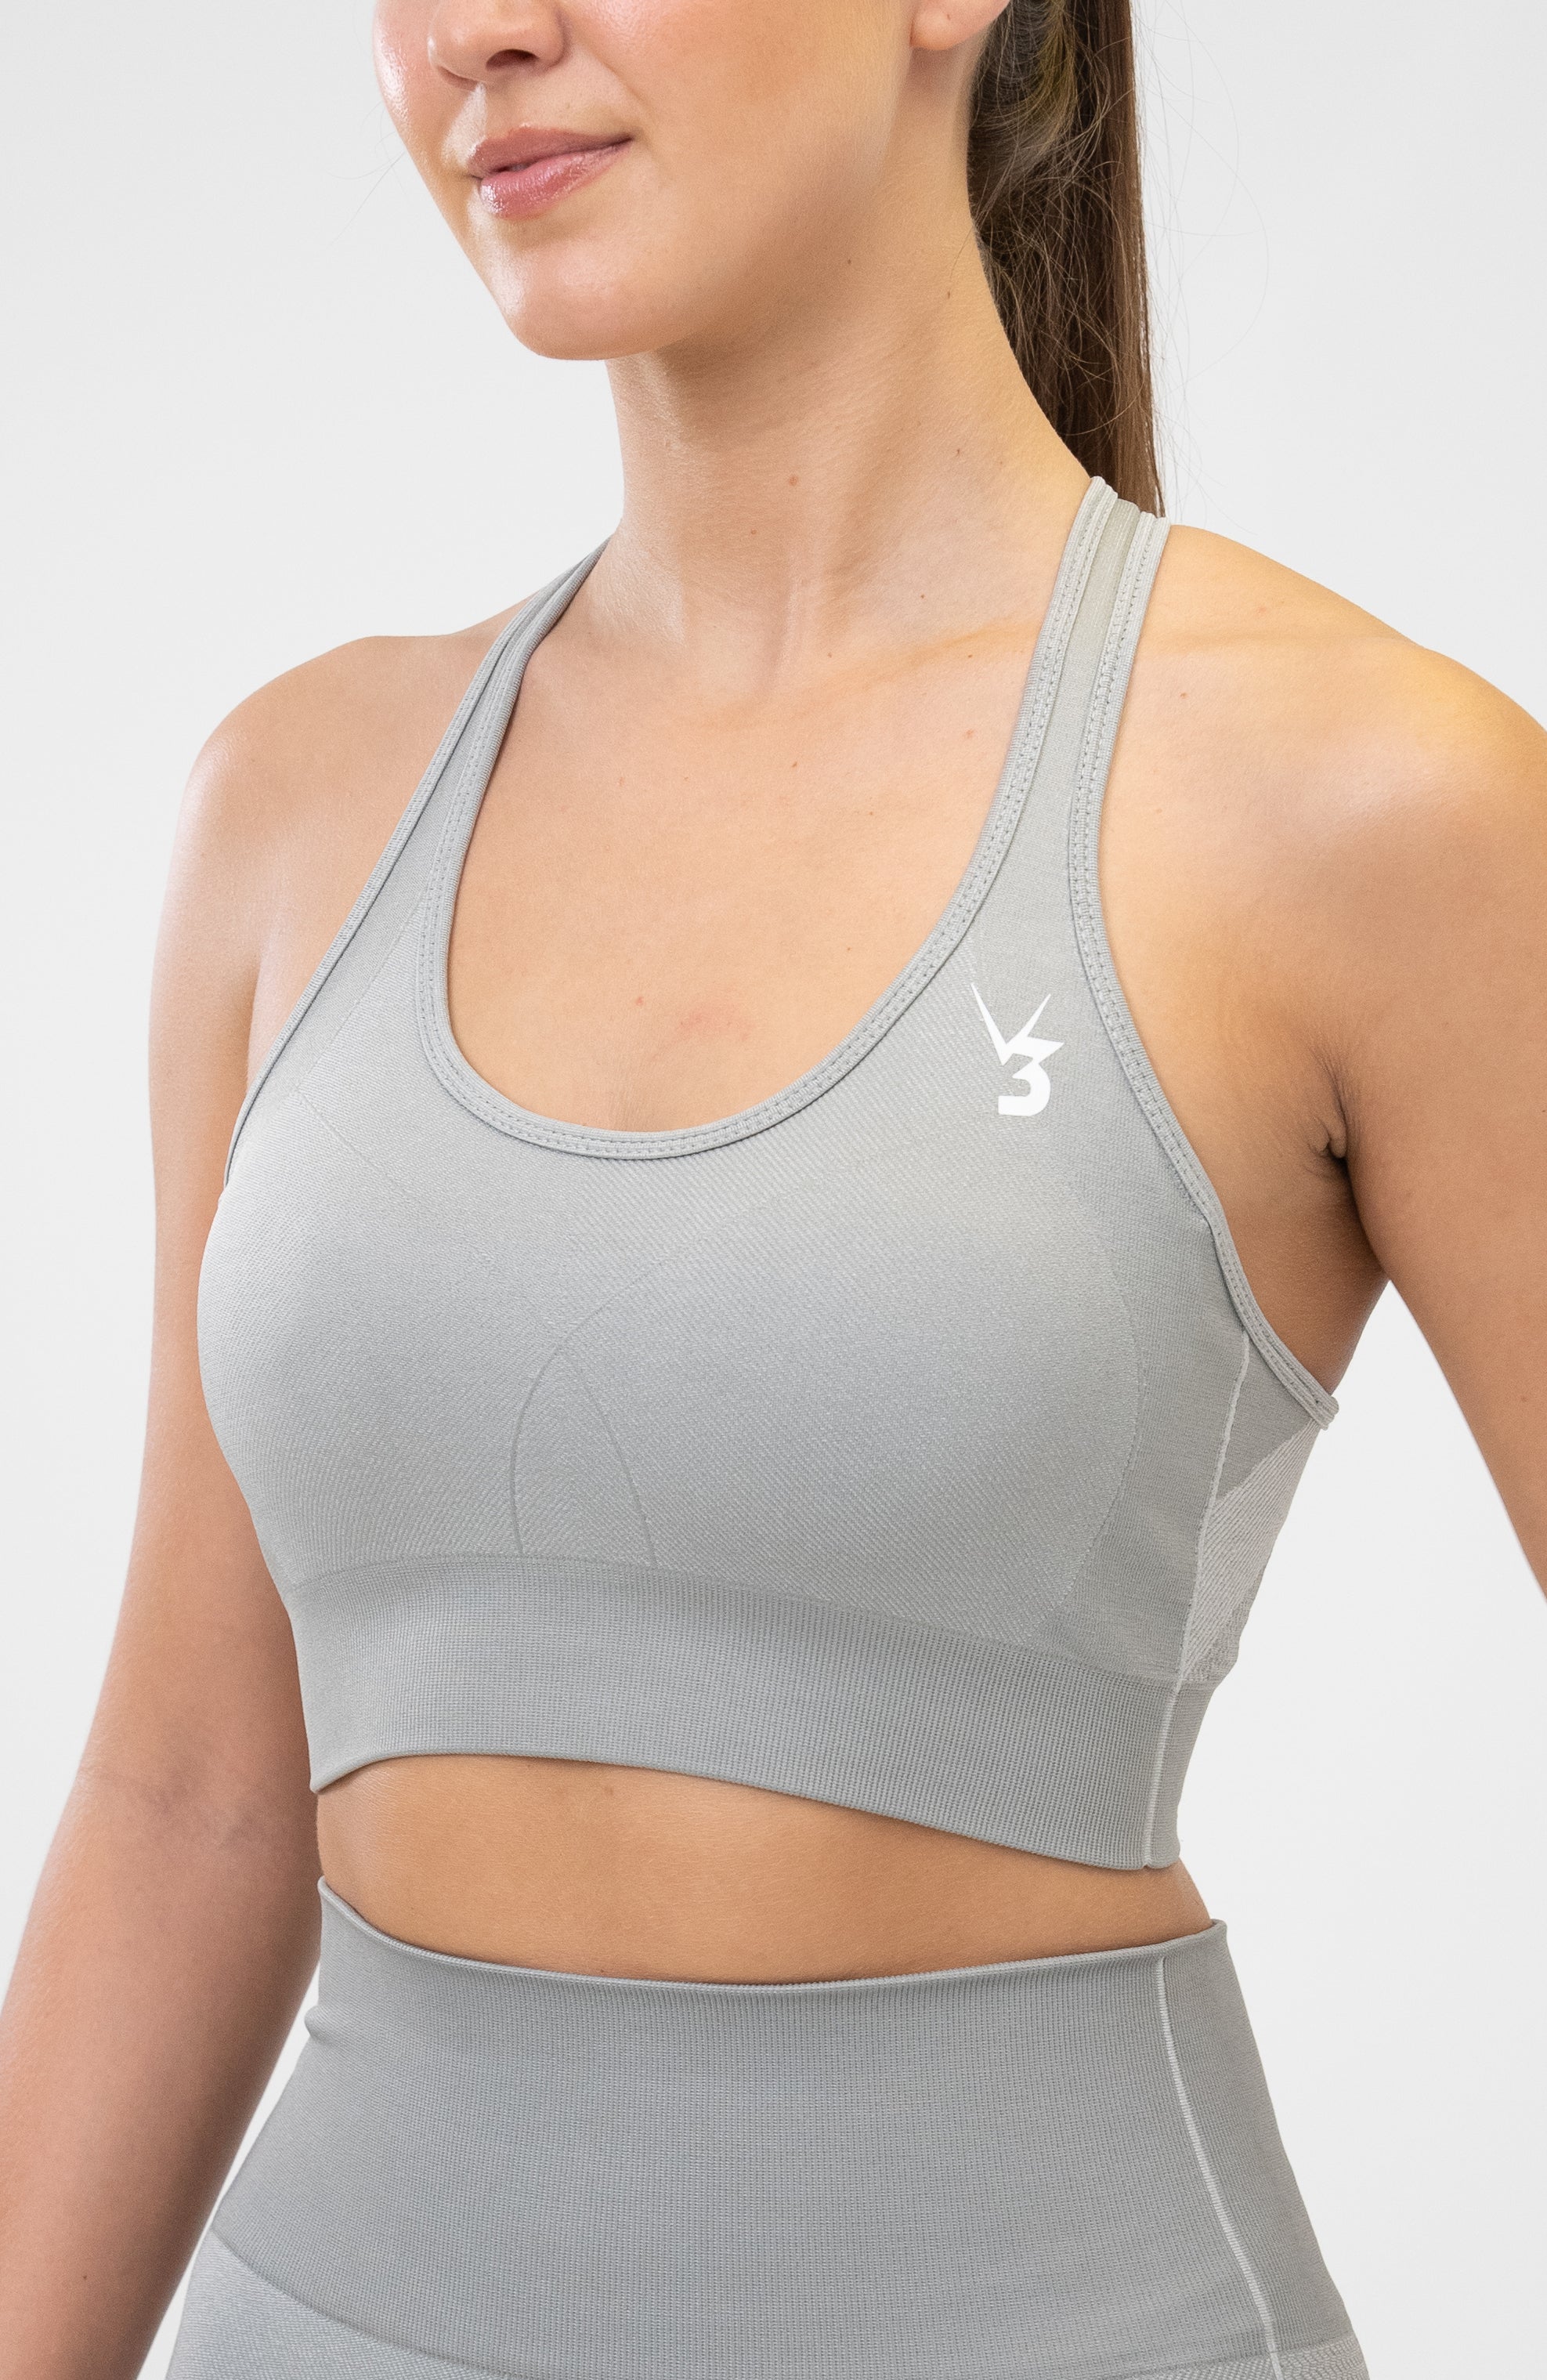 V3 Apparel Women's seamless Unity training sports bra in grey with removable padded cups and strap for gym workouts training, Running, yoga, bodybuilding and bikini fitness.